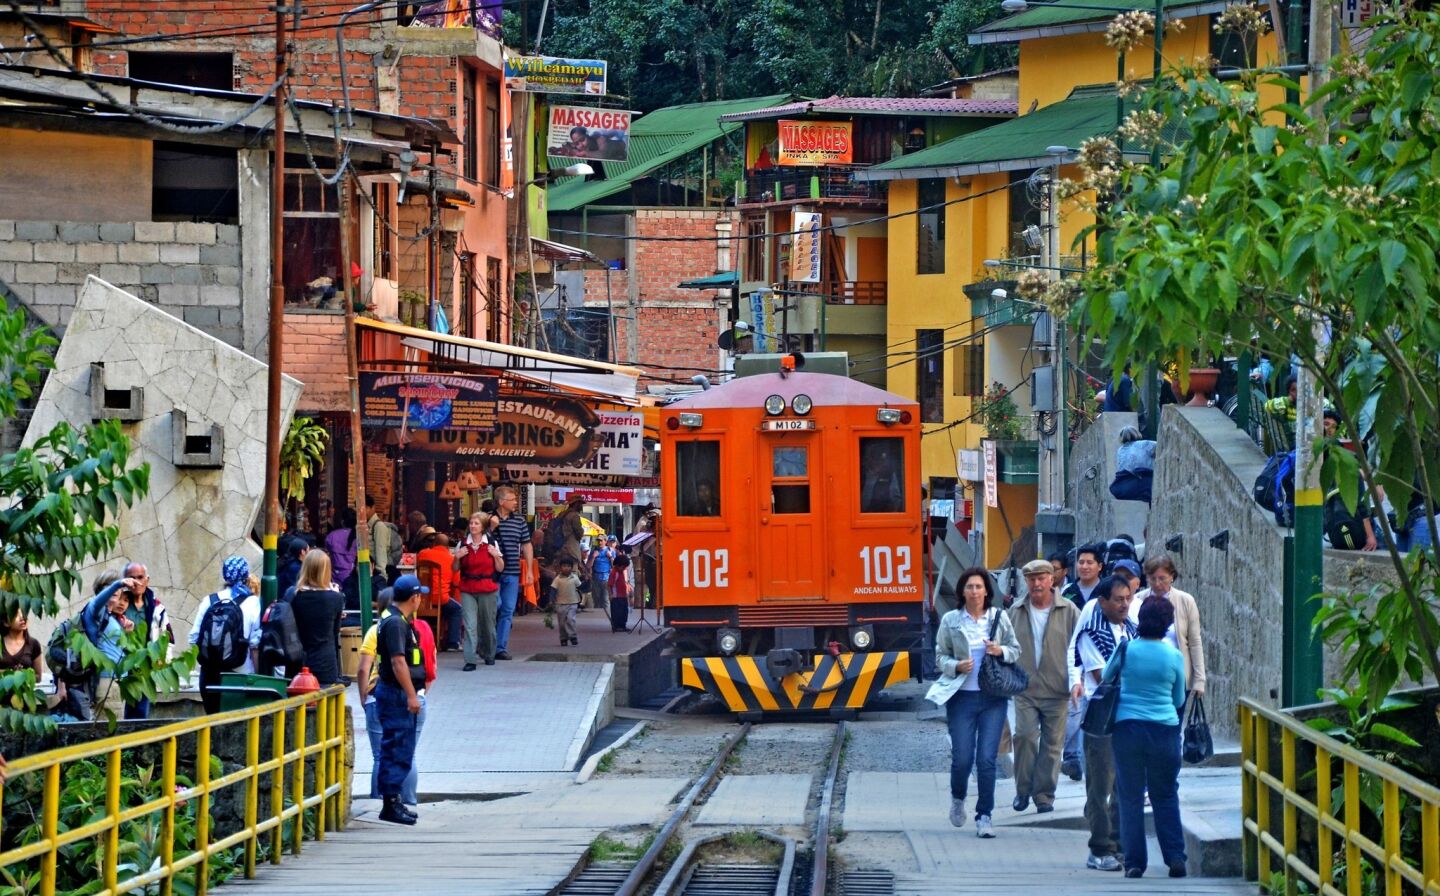 The town of Aguas Calientes, Peru, also known as El Pueblo de Machu Picchu, stands at the foot of Machu Picchu, astride the railroad tracks that lead to Cuzco.